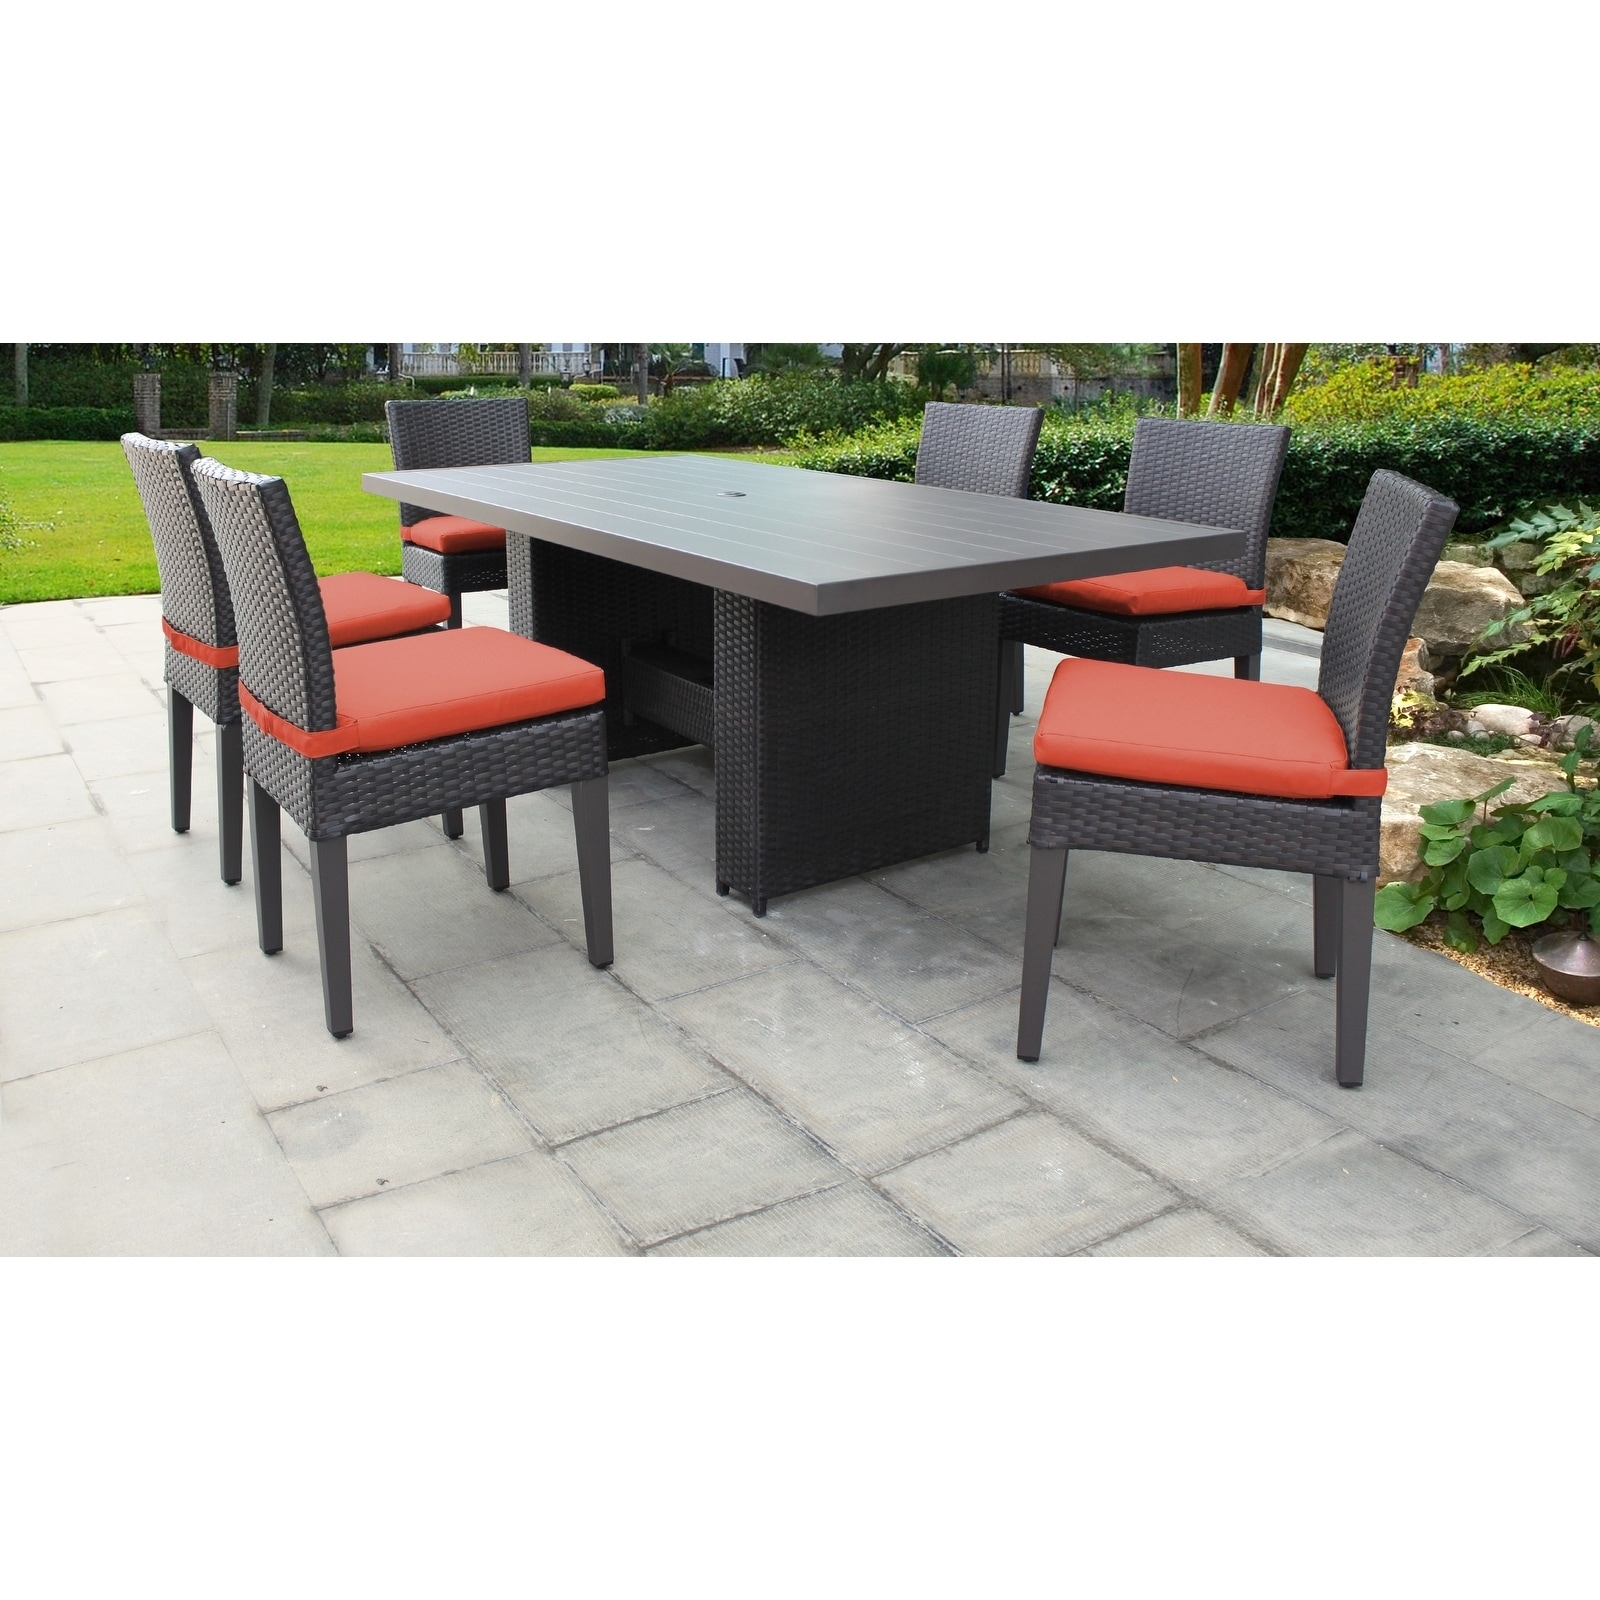 Belle Rectangular Outdoor Patio Dining Table With 6 Armless Chairs